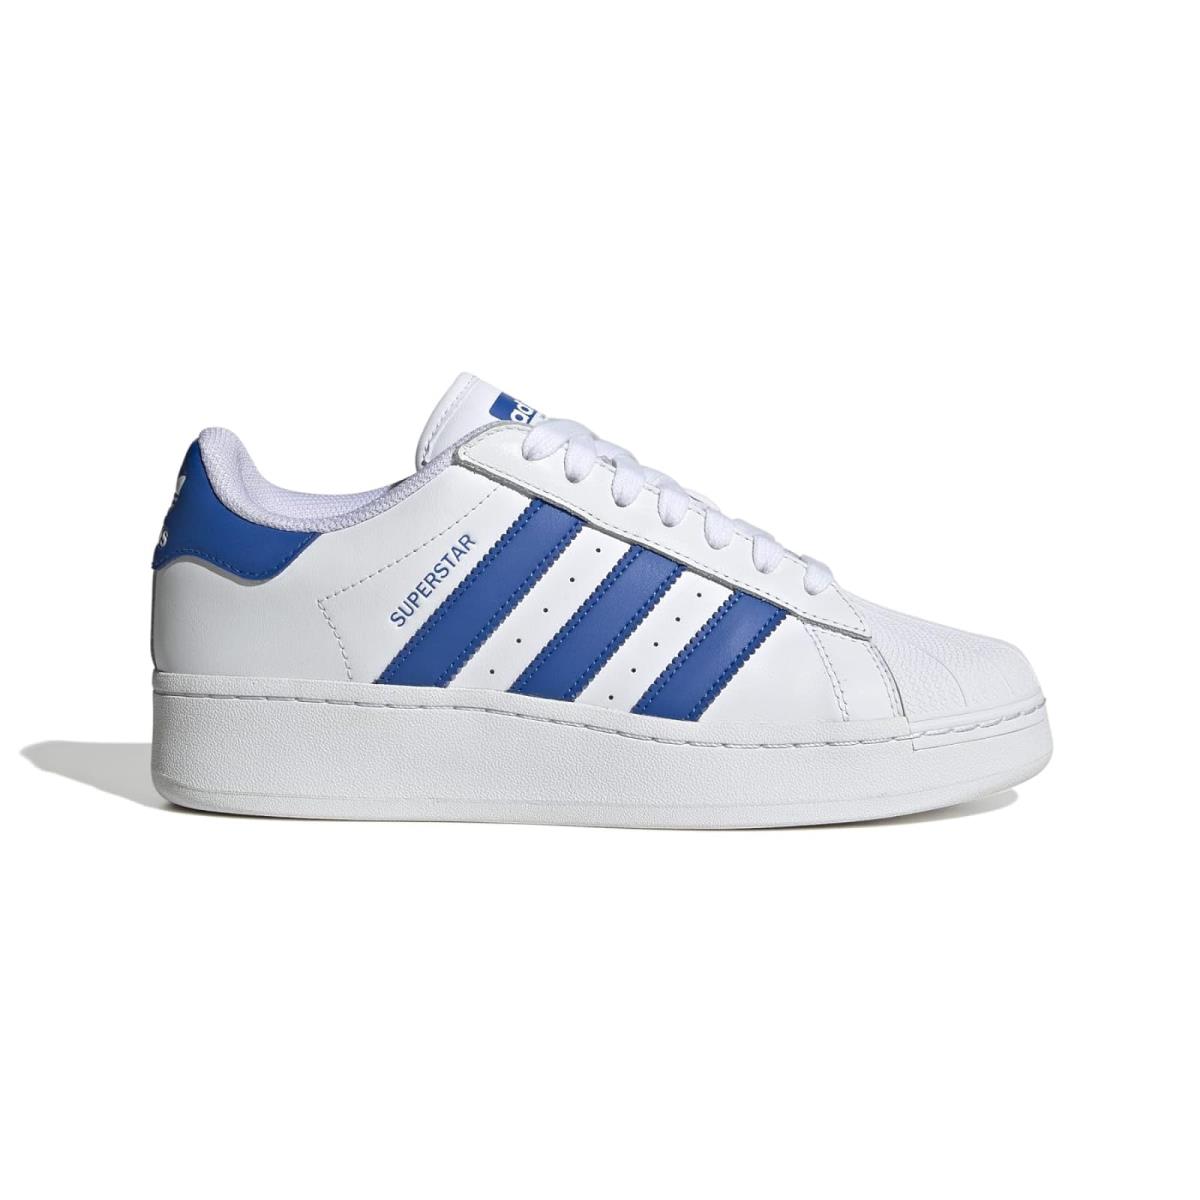 Unisex Sneakers Athletic Shoes Adidas Originals Superstar Xlg White/Blue/White